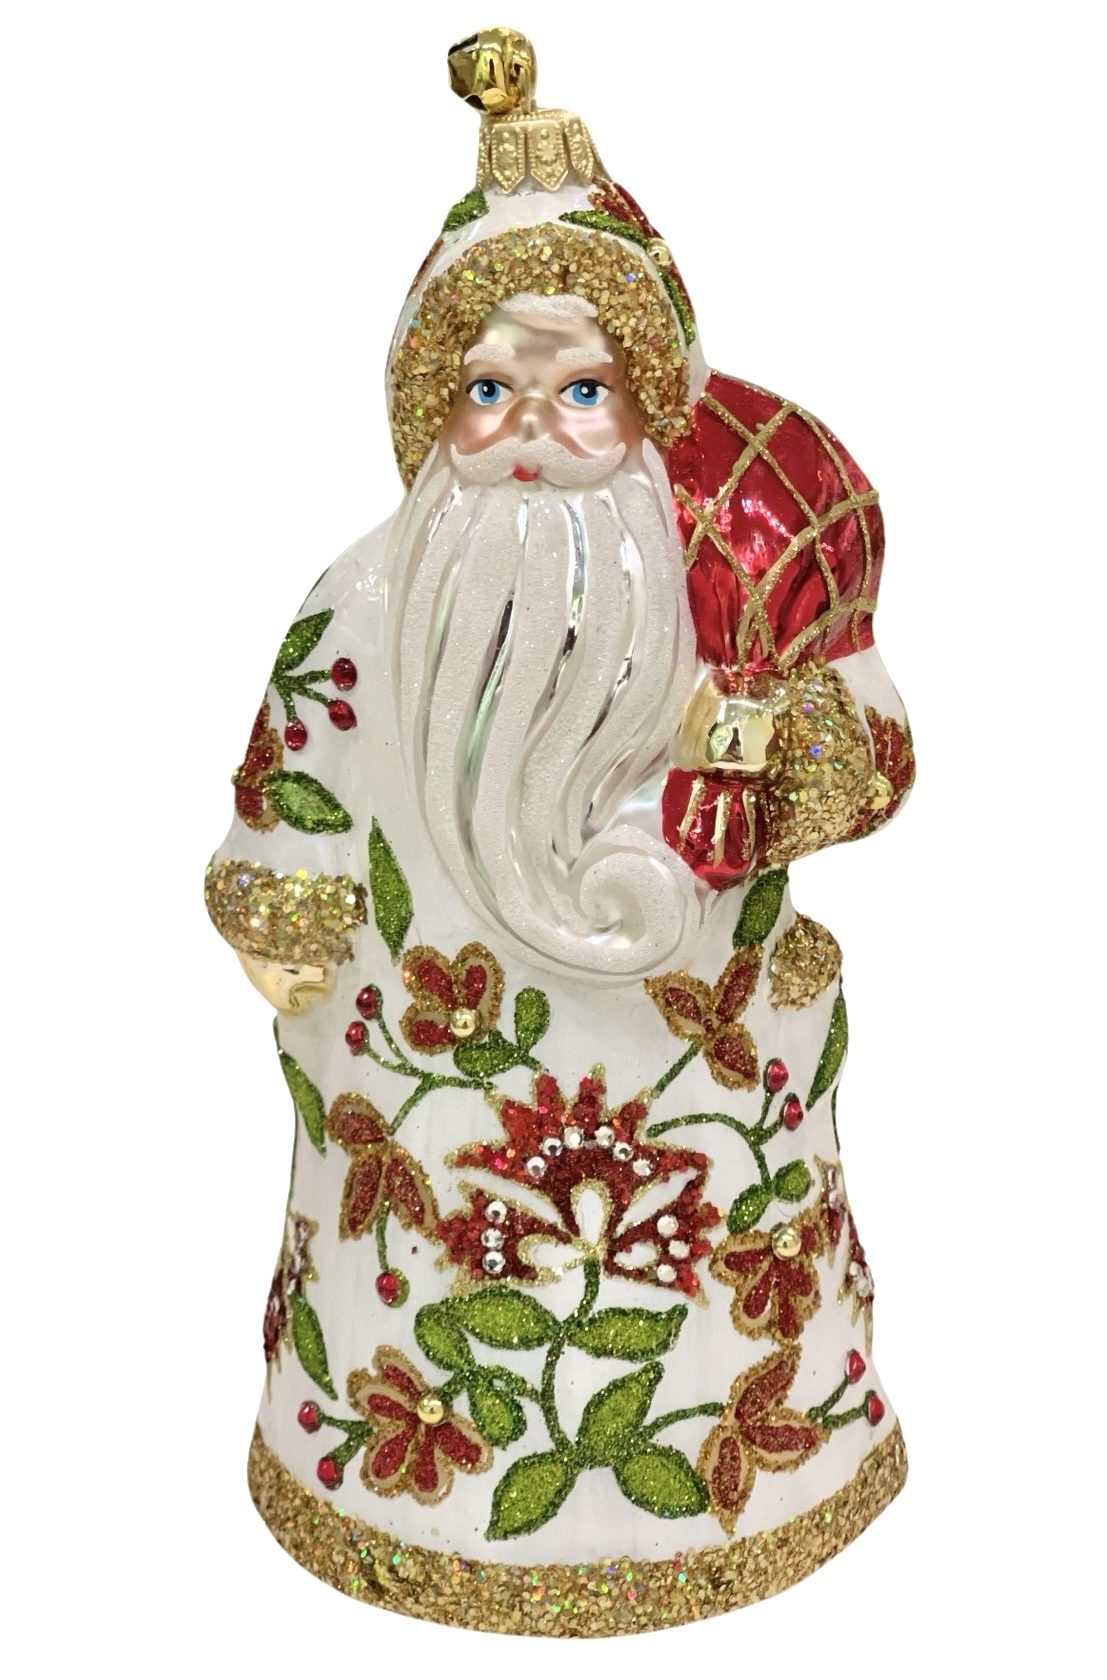 Hand Painted Blown Glass Holiday Floral Patterned Collectible Santa Claus Christmas Tree Ornament Decoration